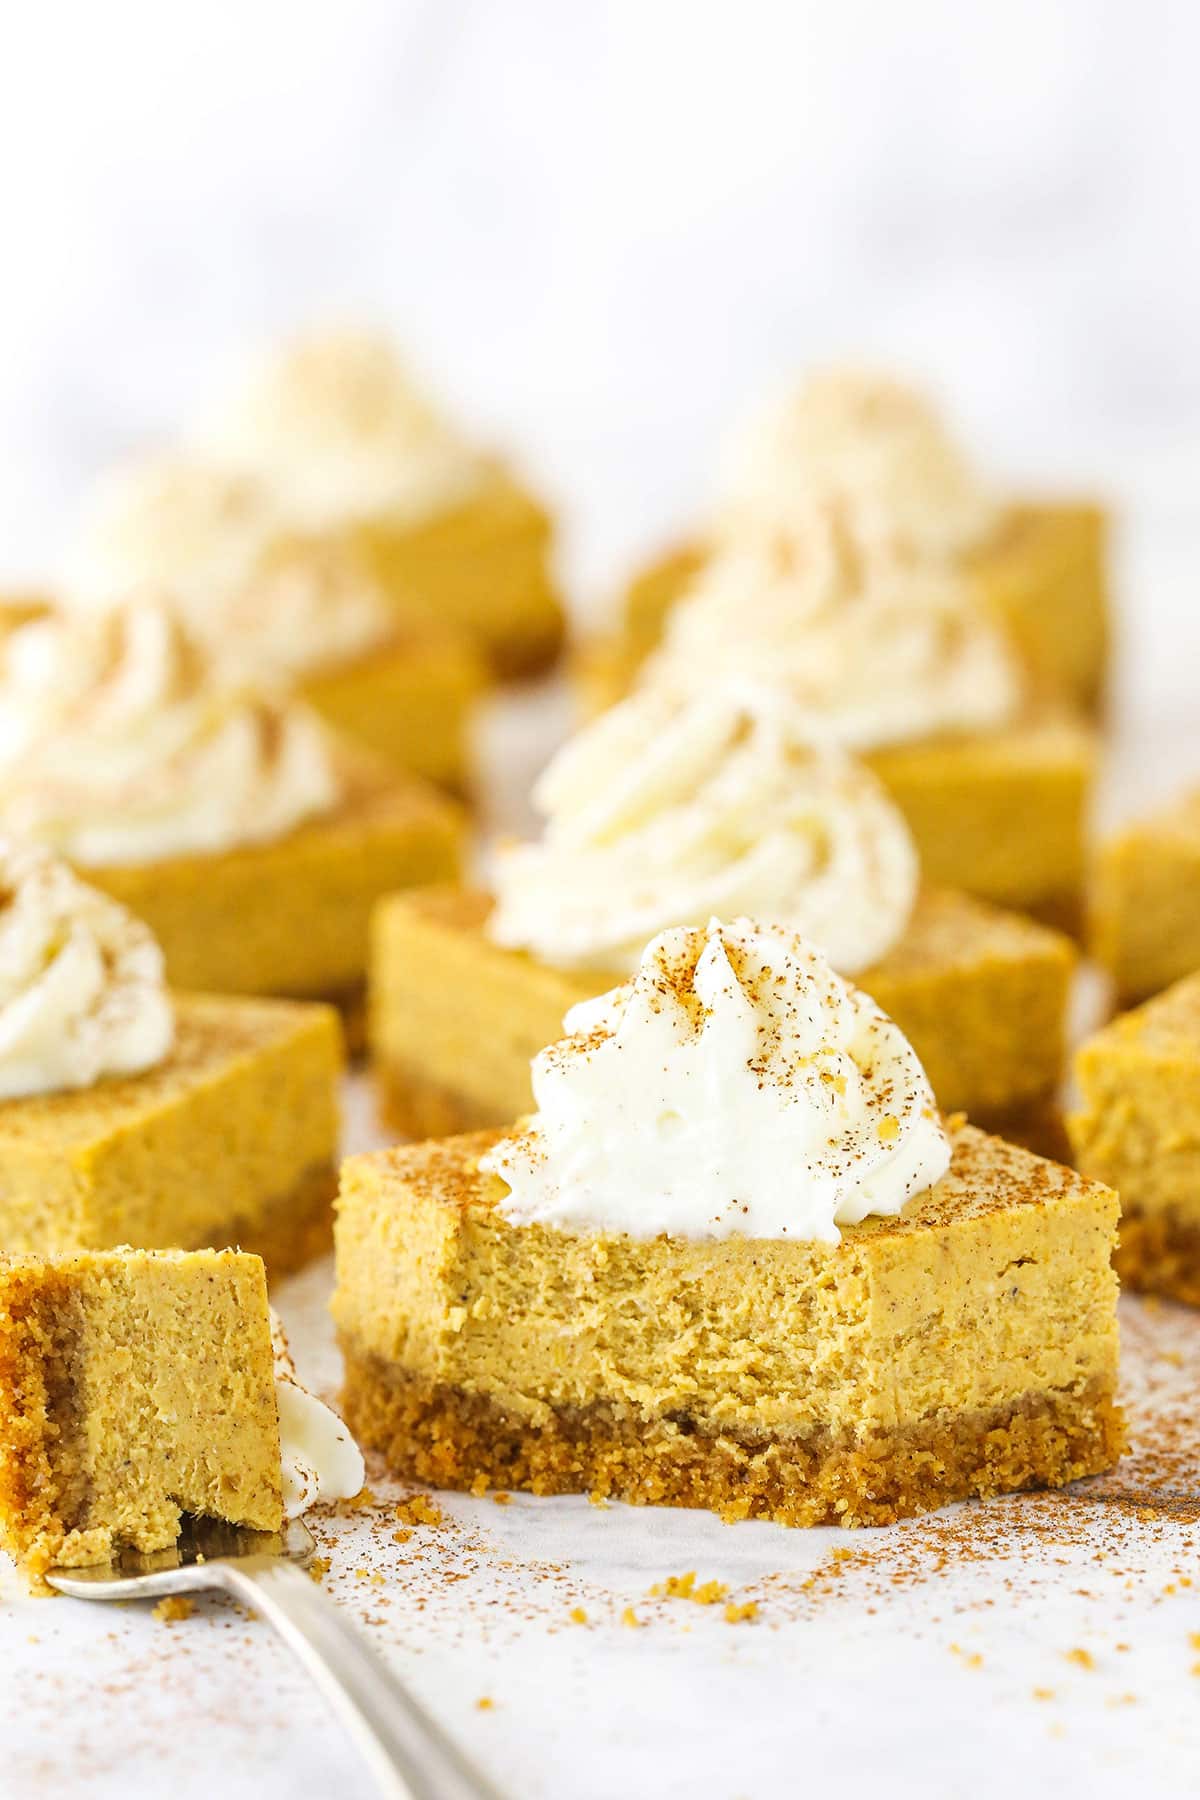 Pumpkin Cheesecake Bars topped with frosting swirls on a white table and one Pumpkin Cheesecake Bar with a bite taken